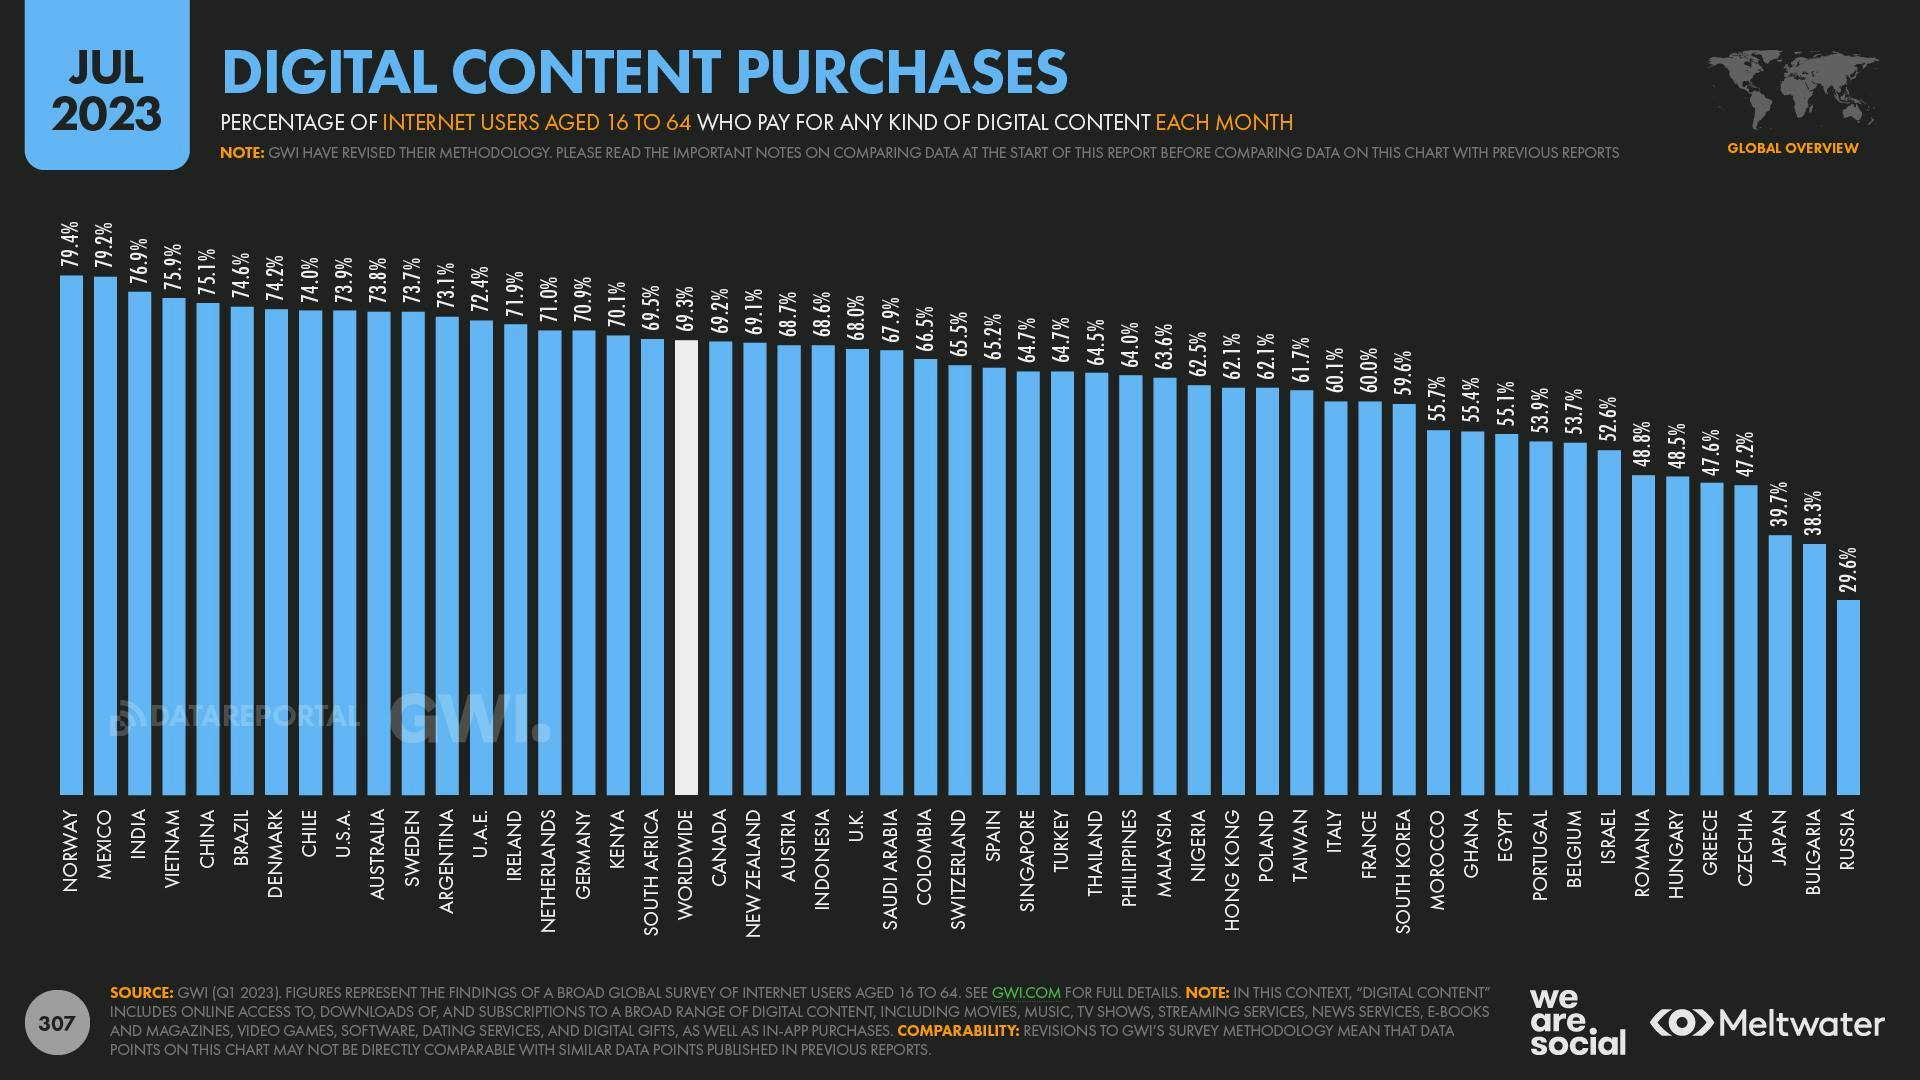 A bar chart showing the percentages of people who pay for any kind of digital content each month across nations.